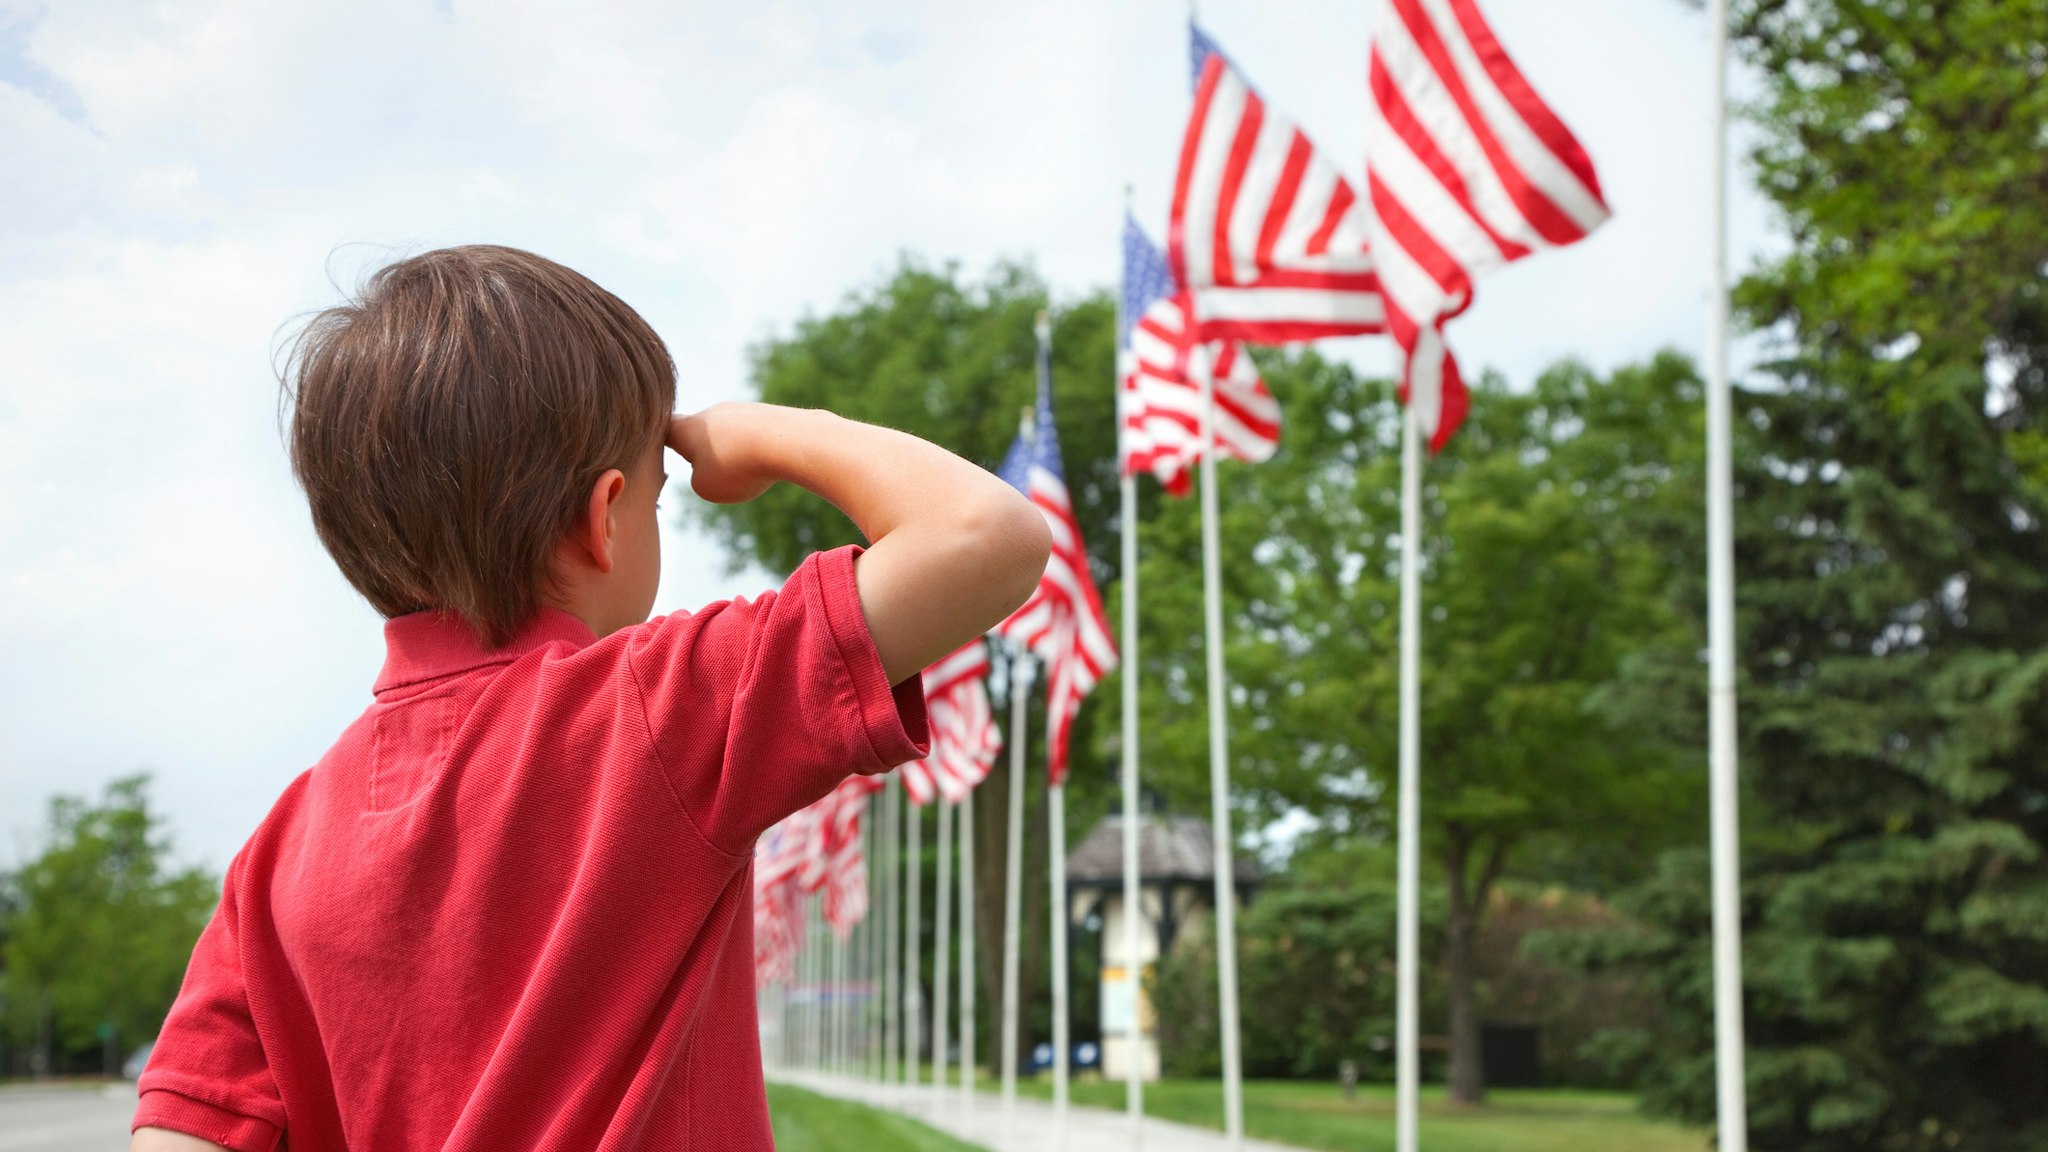 A young boy salutes the flags of a Memorial Day display along a small town street